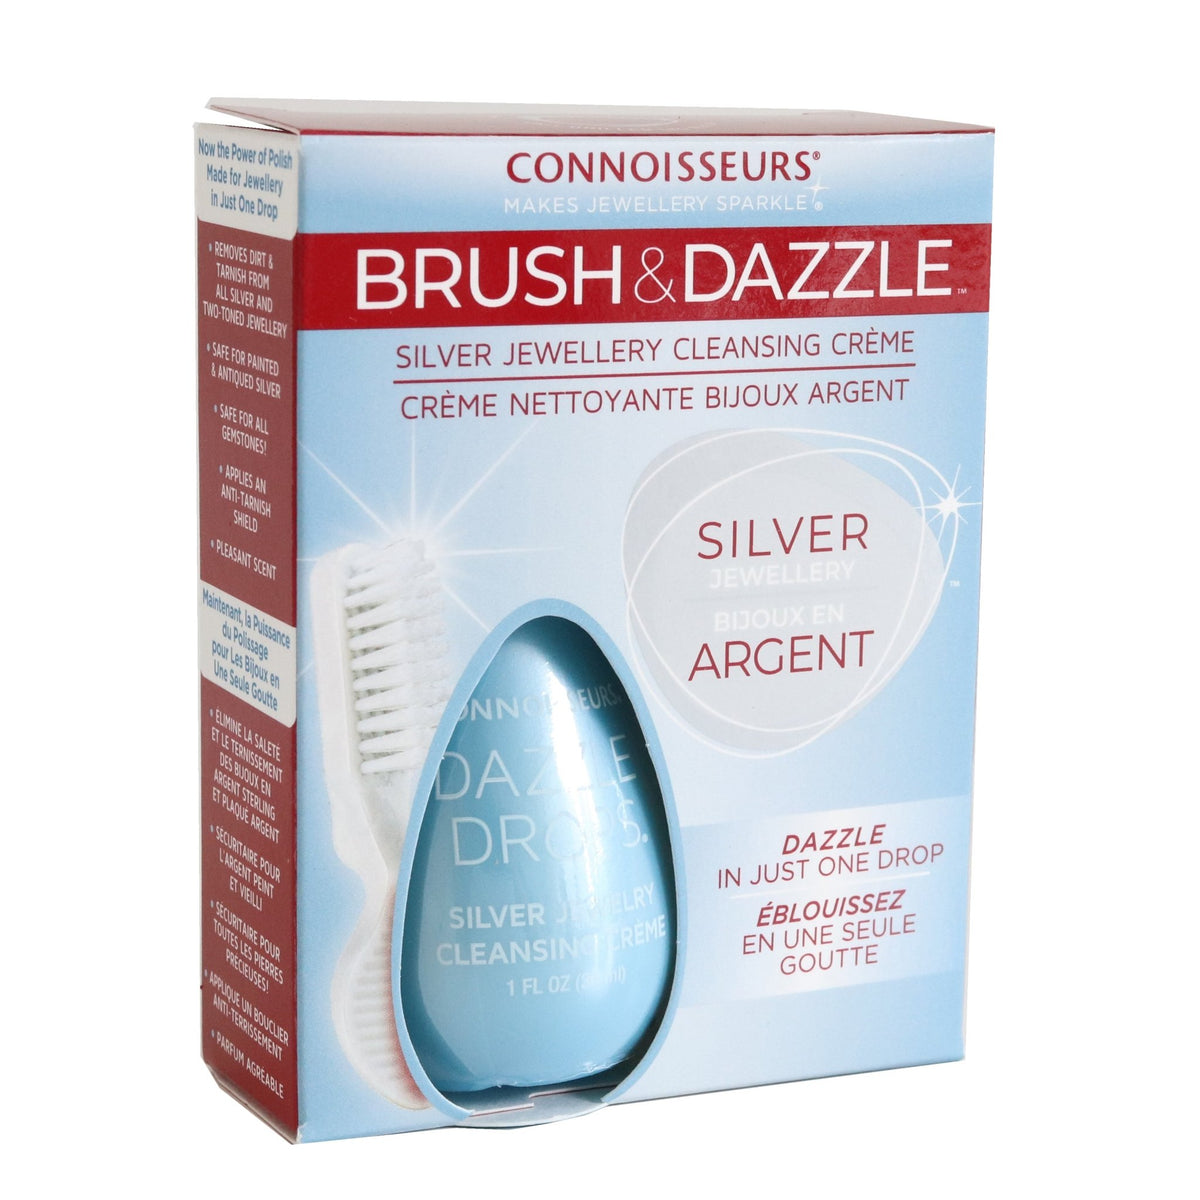 Connoisseurs® Brush &amp; Dazzle Silver &amp; Vermeil Jewelry Cleansing Cream - SO PRETTY CARA COTTER